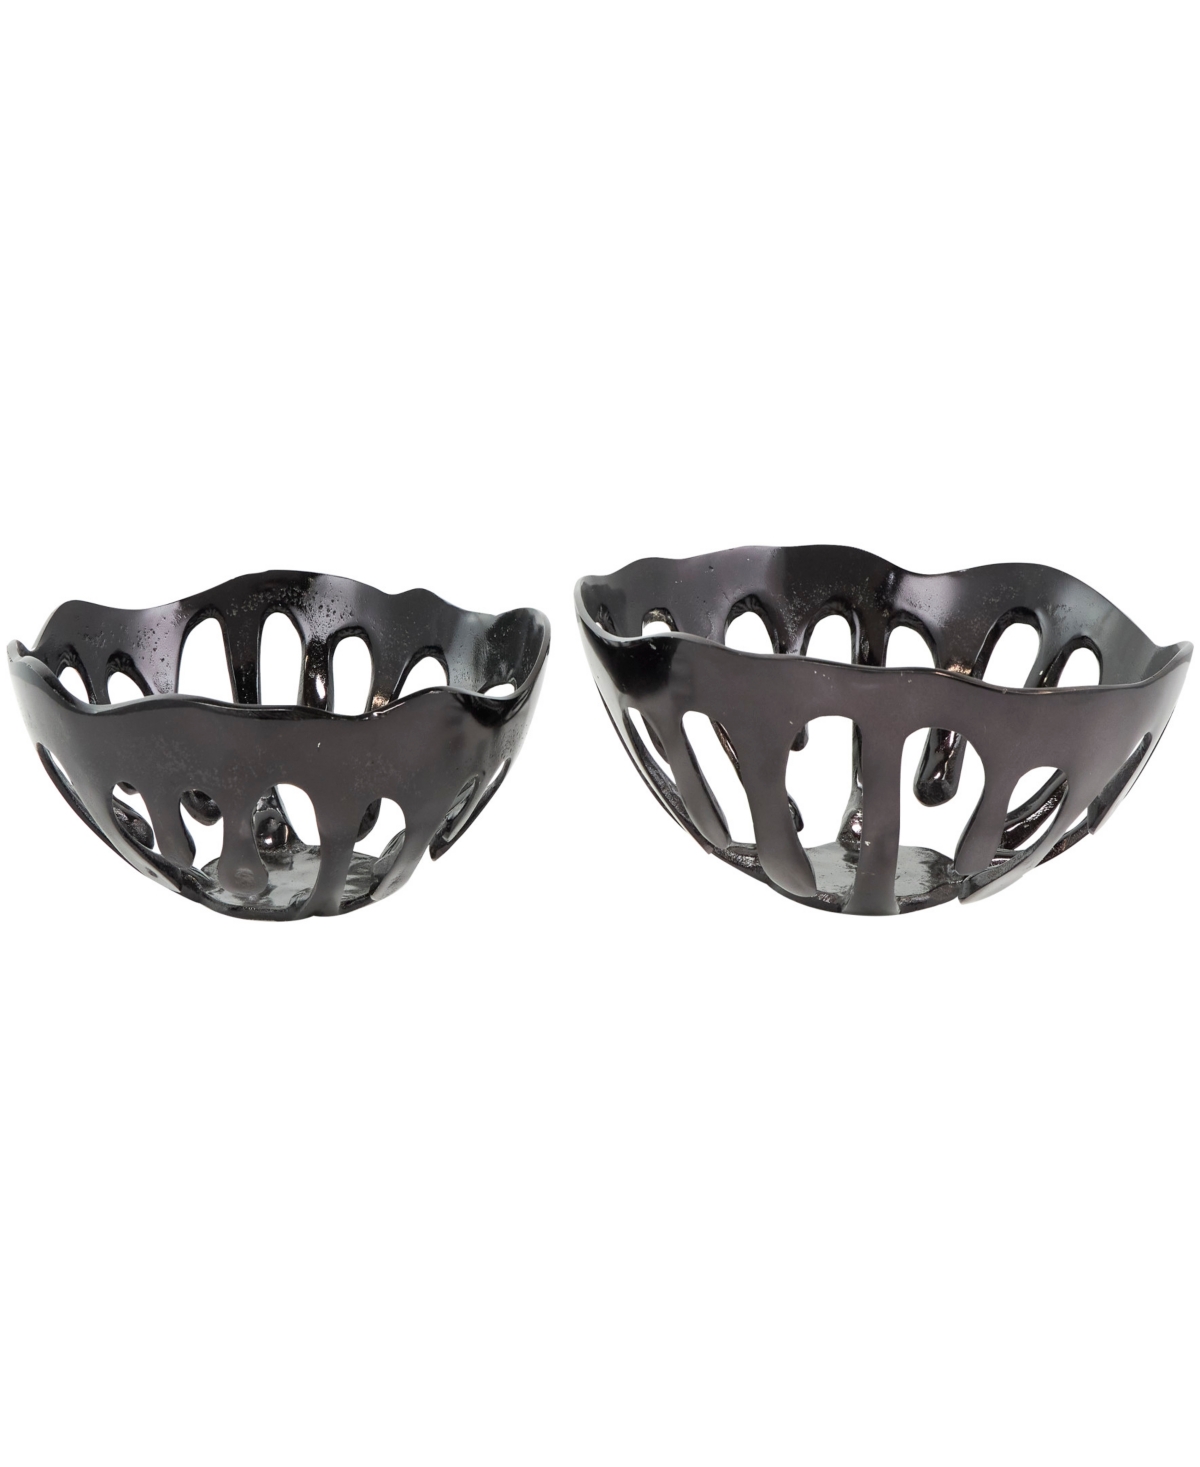 Rosemary Lane Aluminum Drip Decorative Bowl With Open Frame Design, Set Of 2 In Black